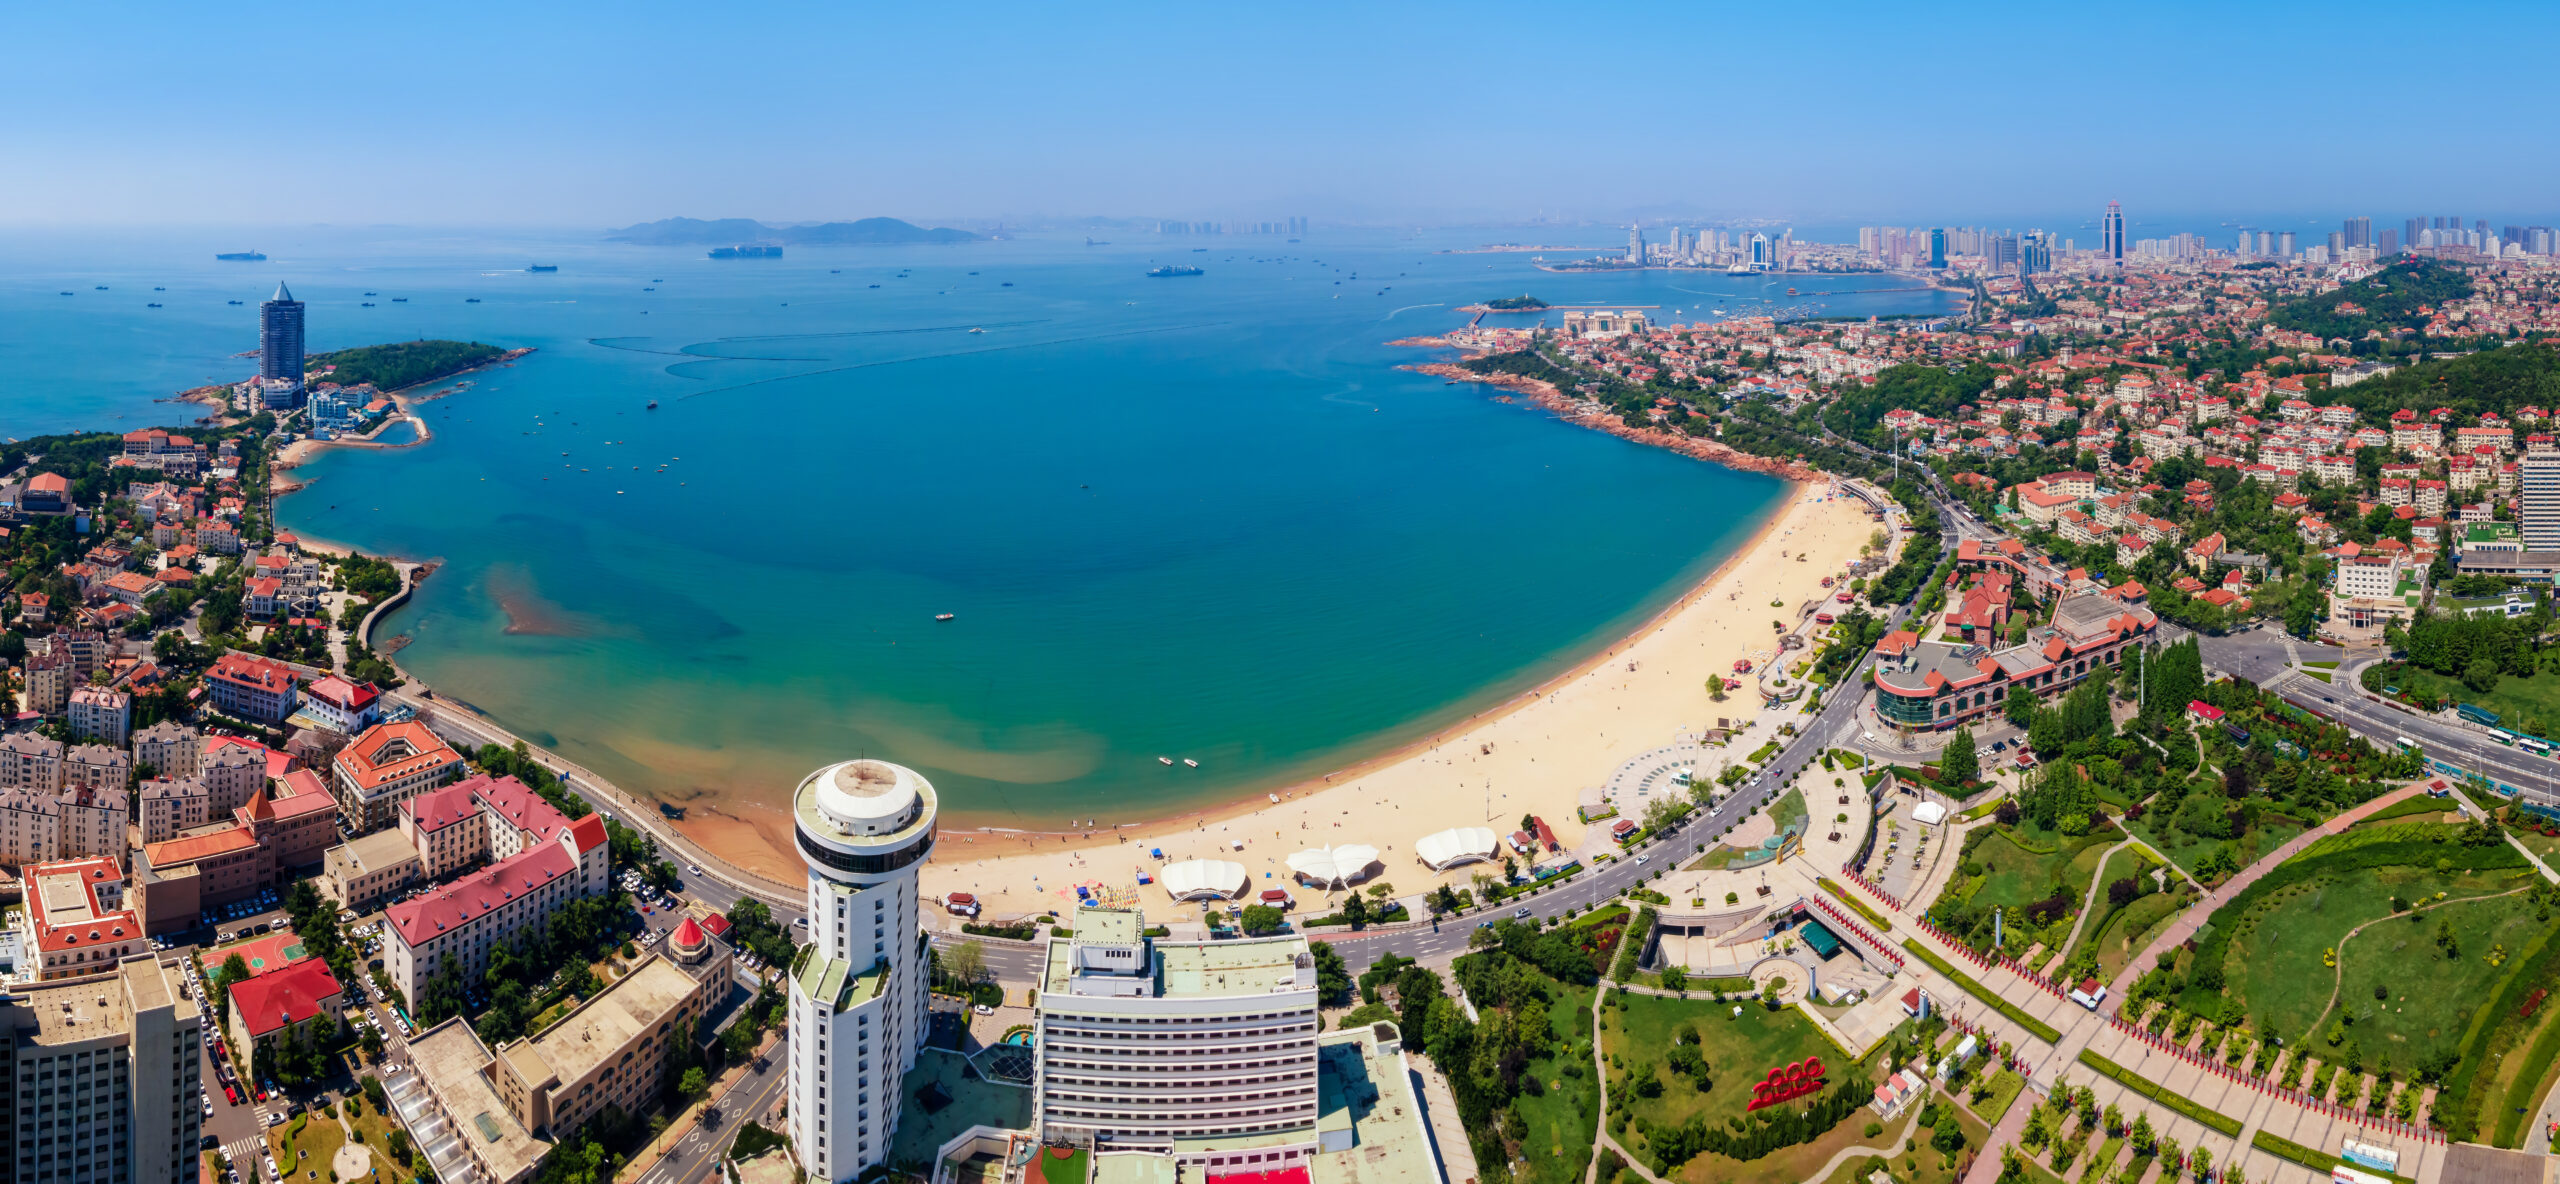 <p>Qingdao Huiquan Beach is located in Qingdao, China. Checking out the beaches of China might sound like a dreamy adventure, but this particular beach is way too crowded to be much fun for anyone. Around 130,000 people make their way over to Qingdao Huiquan Beach every single day.</p> <p>Since the beach is so close to the city, the proximity is one of the main reasons it’s so popular. It’s also totally free to visit this beach without any admission fees. People trying to save money while enjoying themselves will typically consider Qingdao Huiquan Beach to be a prime vacation destination. It’s not worth your time if you don’t have enough space to lay a beach towel down.</p>